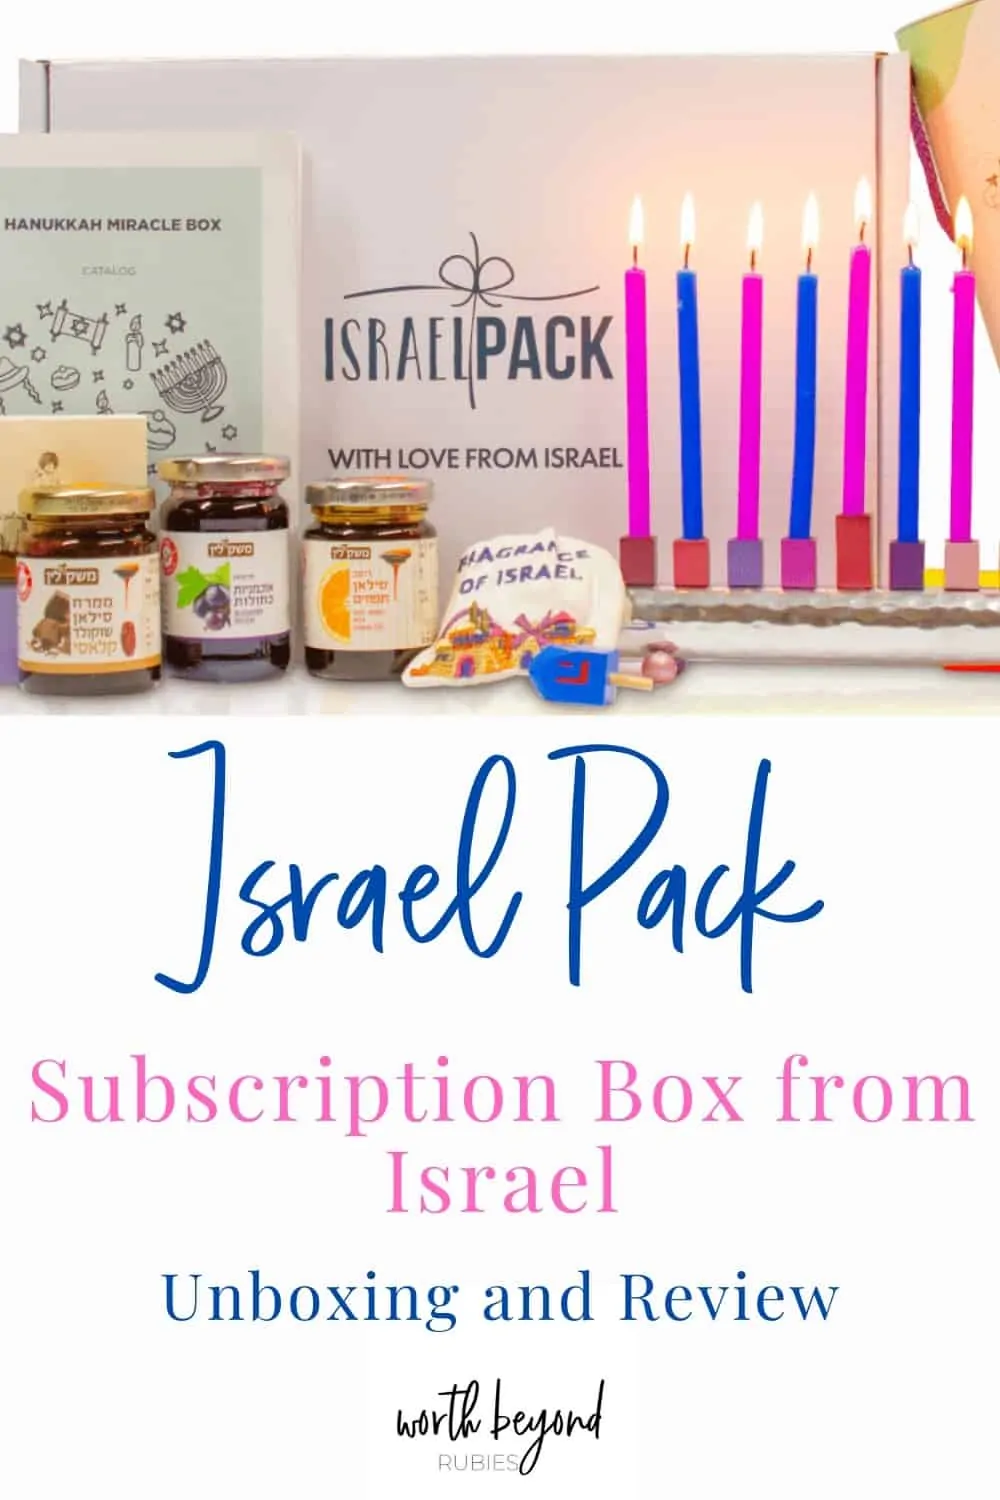 An image of the Israel Pack Subscription Box for November 2020 with a text overlay that says Israel Pack Subscription Box from Israel - Unboxing and Review